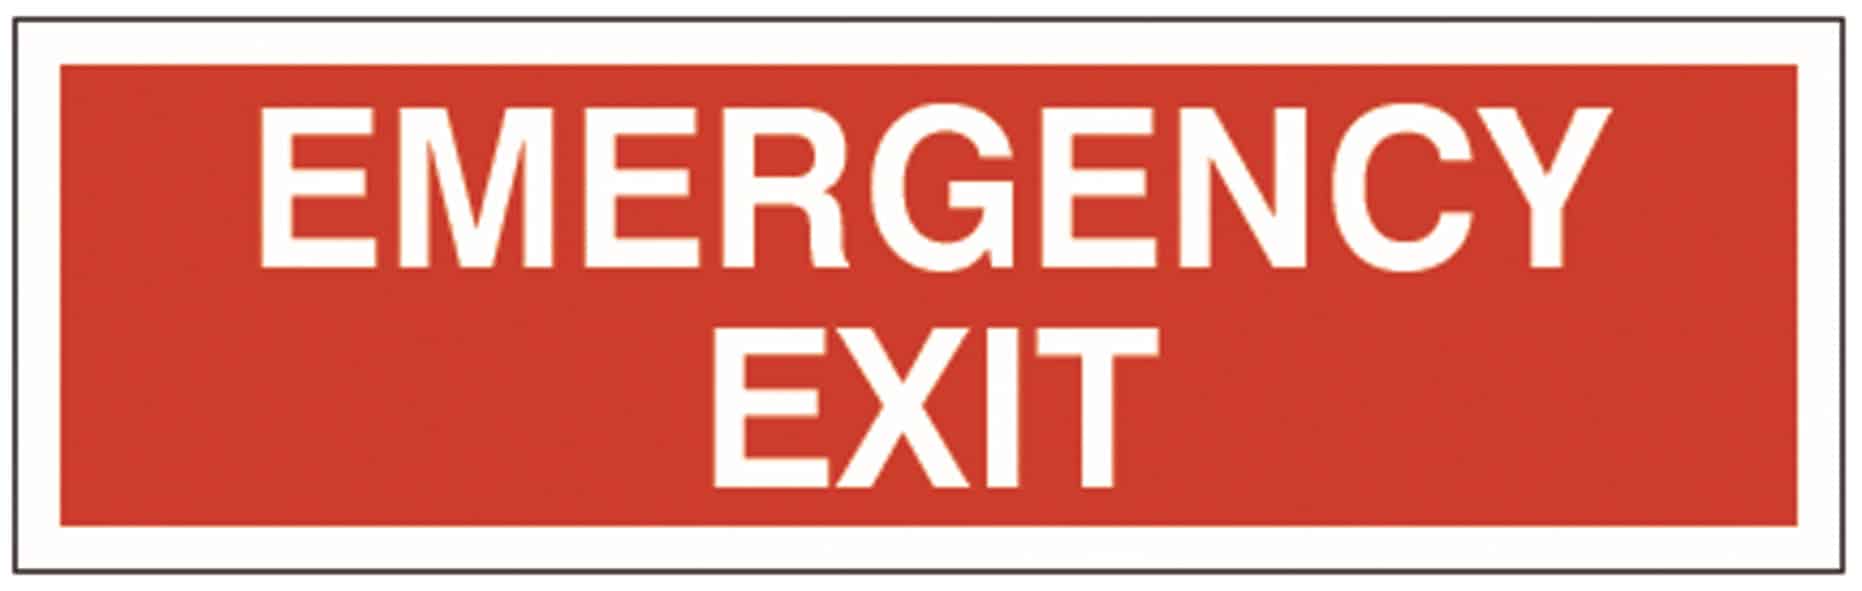 0118 Emergency Exit Small White On Red